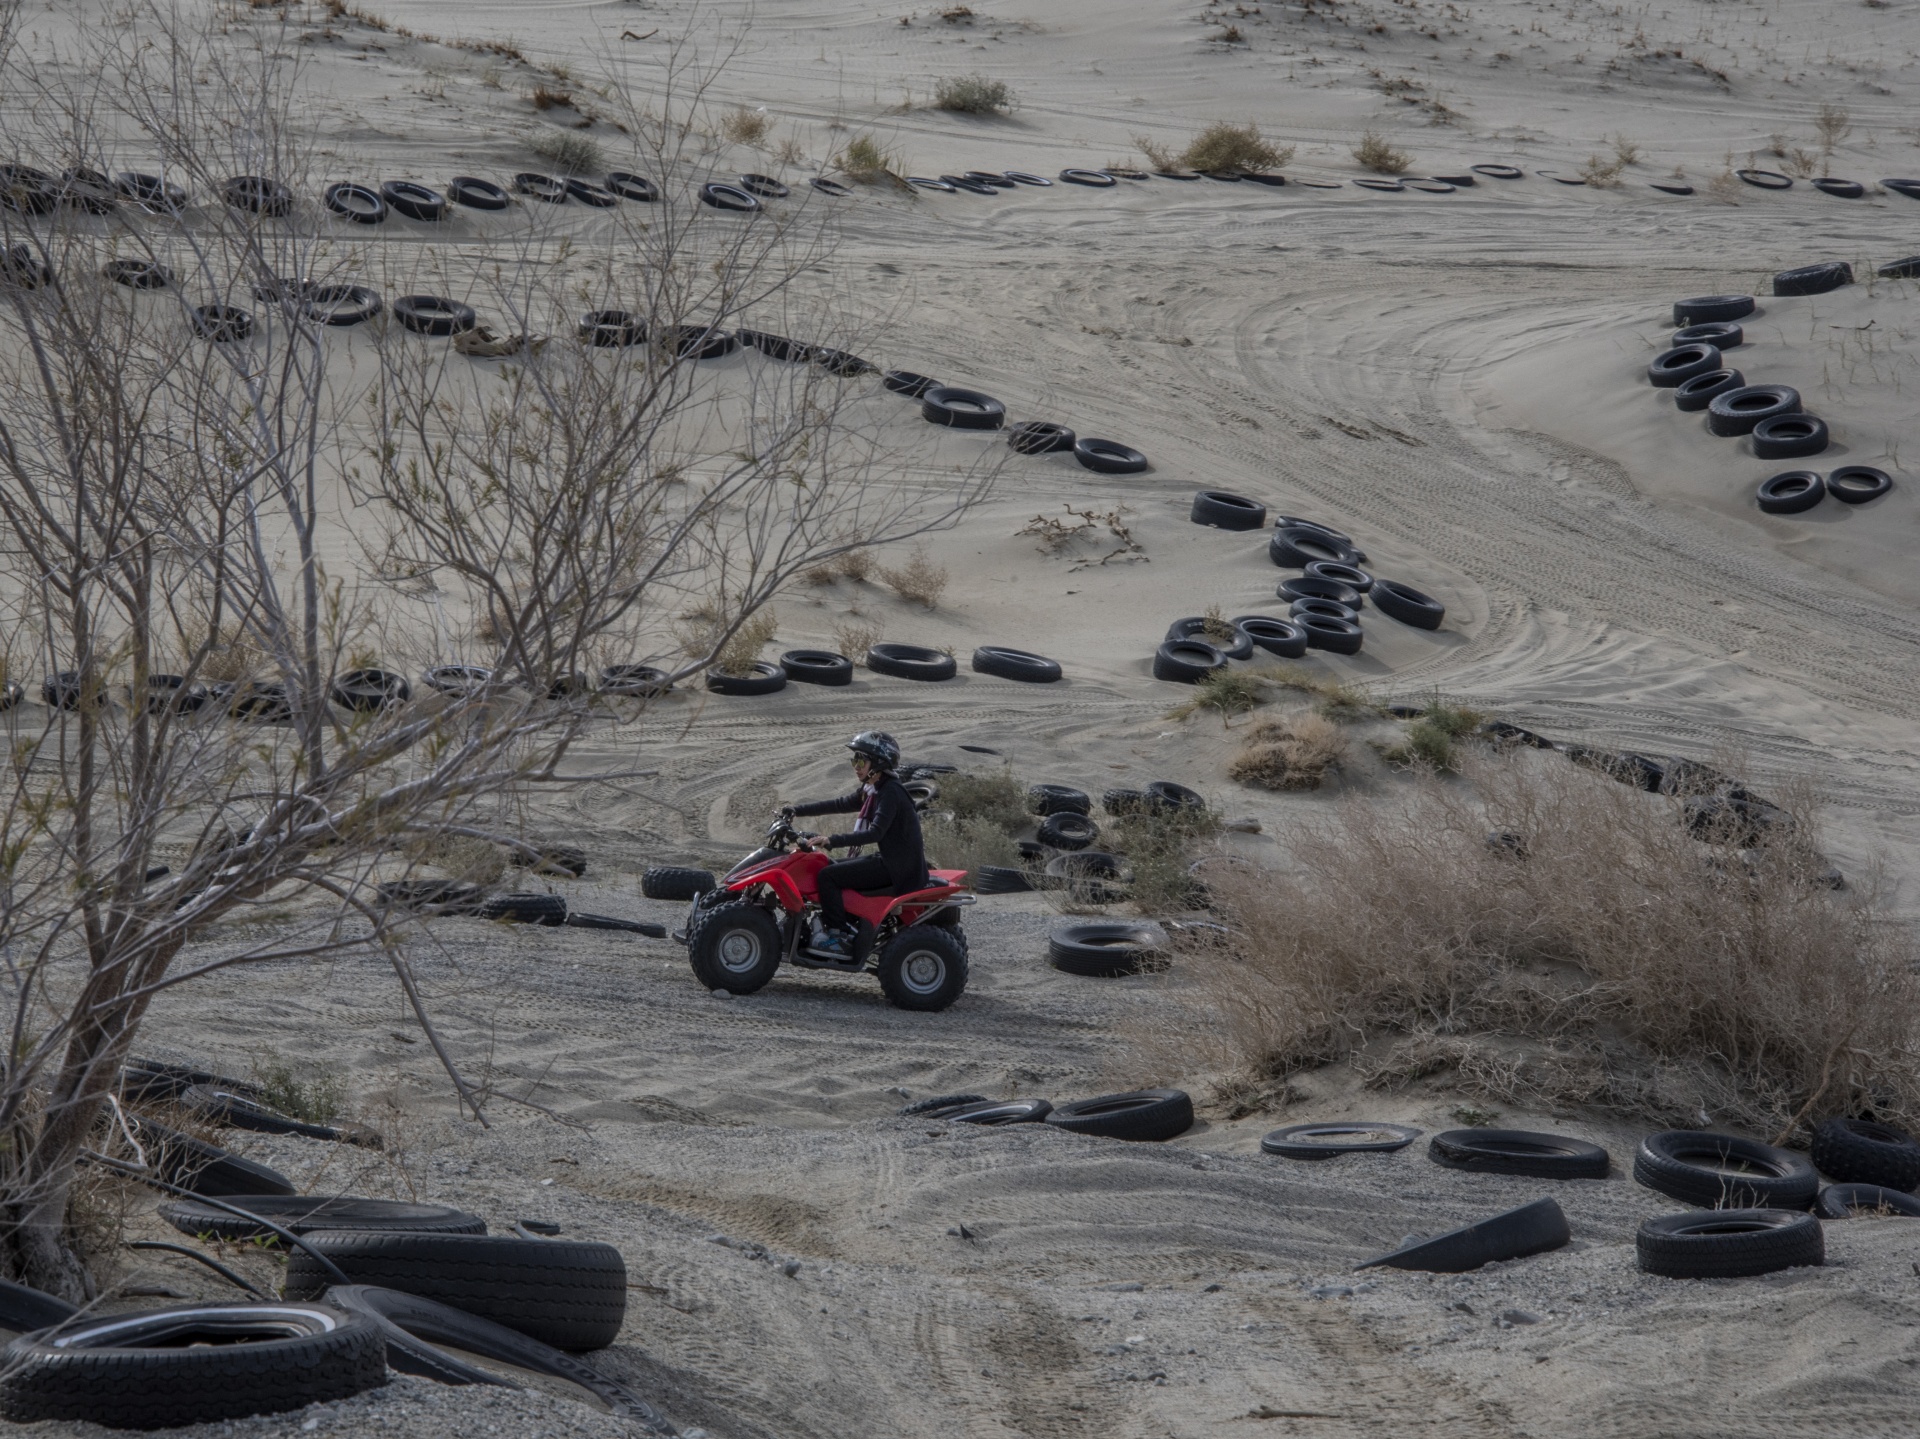 Quad cycle rider runs over a desert track in the sand